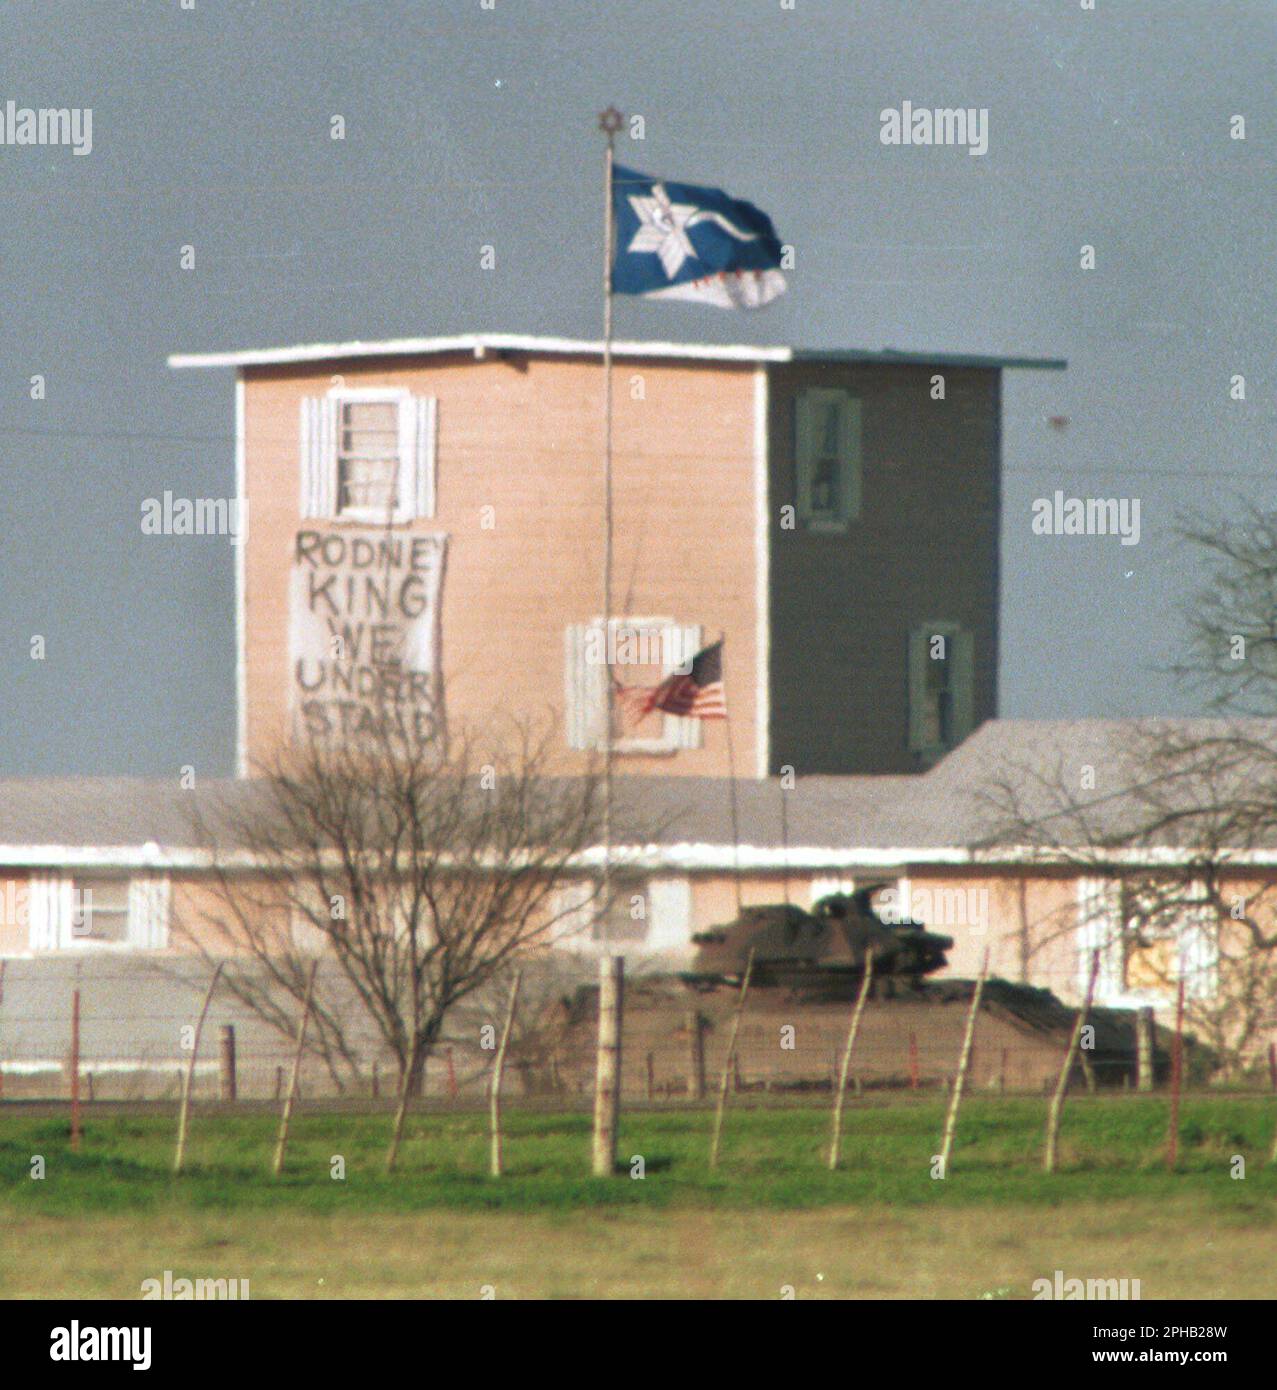 Waco, Texas USA, March 23, 1993: A U.S. Army tank drives past the Branch Davidian compound in the midst of the 51-day standoff between federal law enforcement agents and Branch Davidian religious group members. The siege ended in a devastating fire that killed 76 men, women and children holed up in the compound.  ©Bob Daemmrich Stock Photo